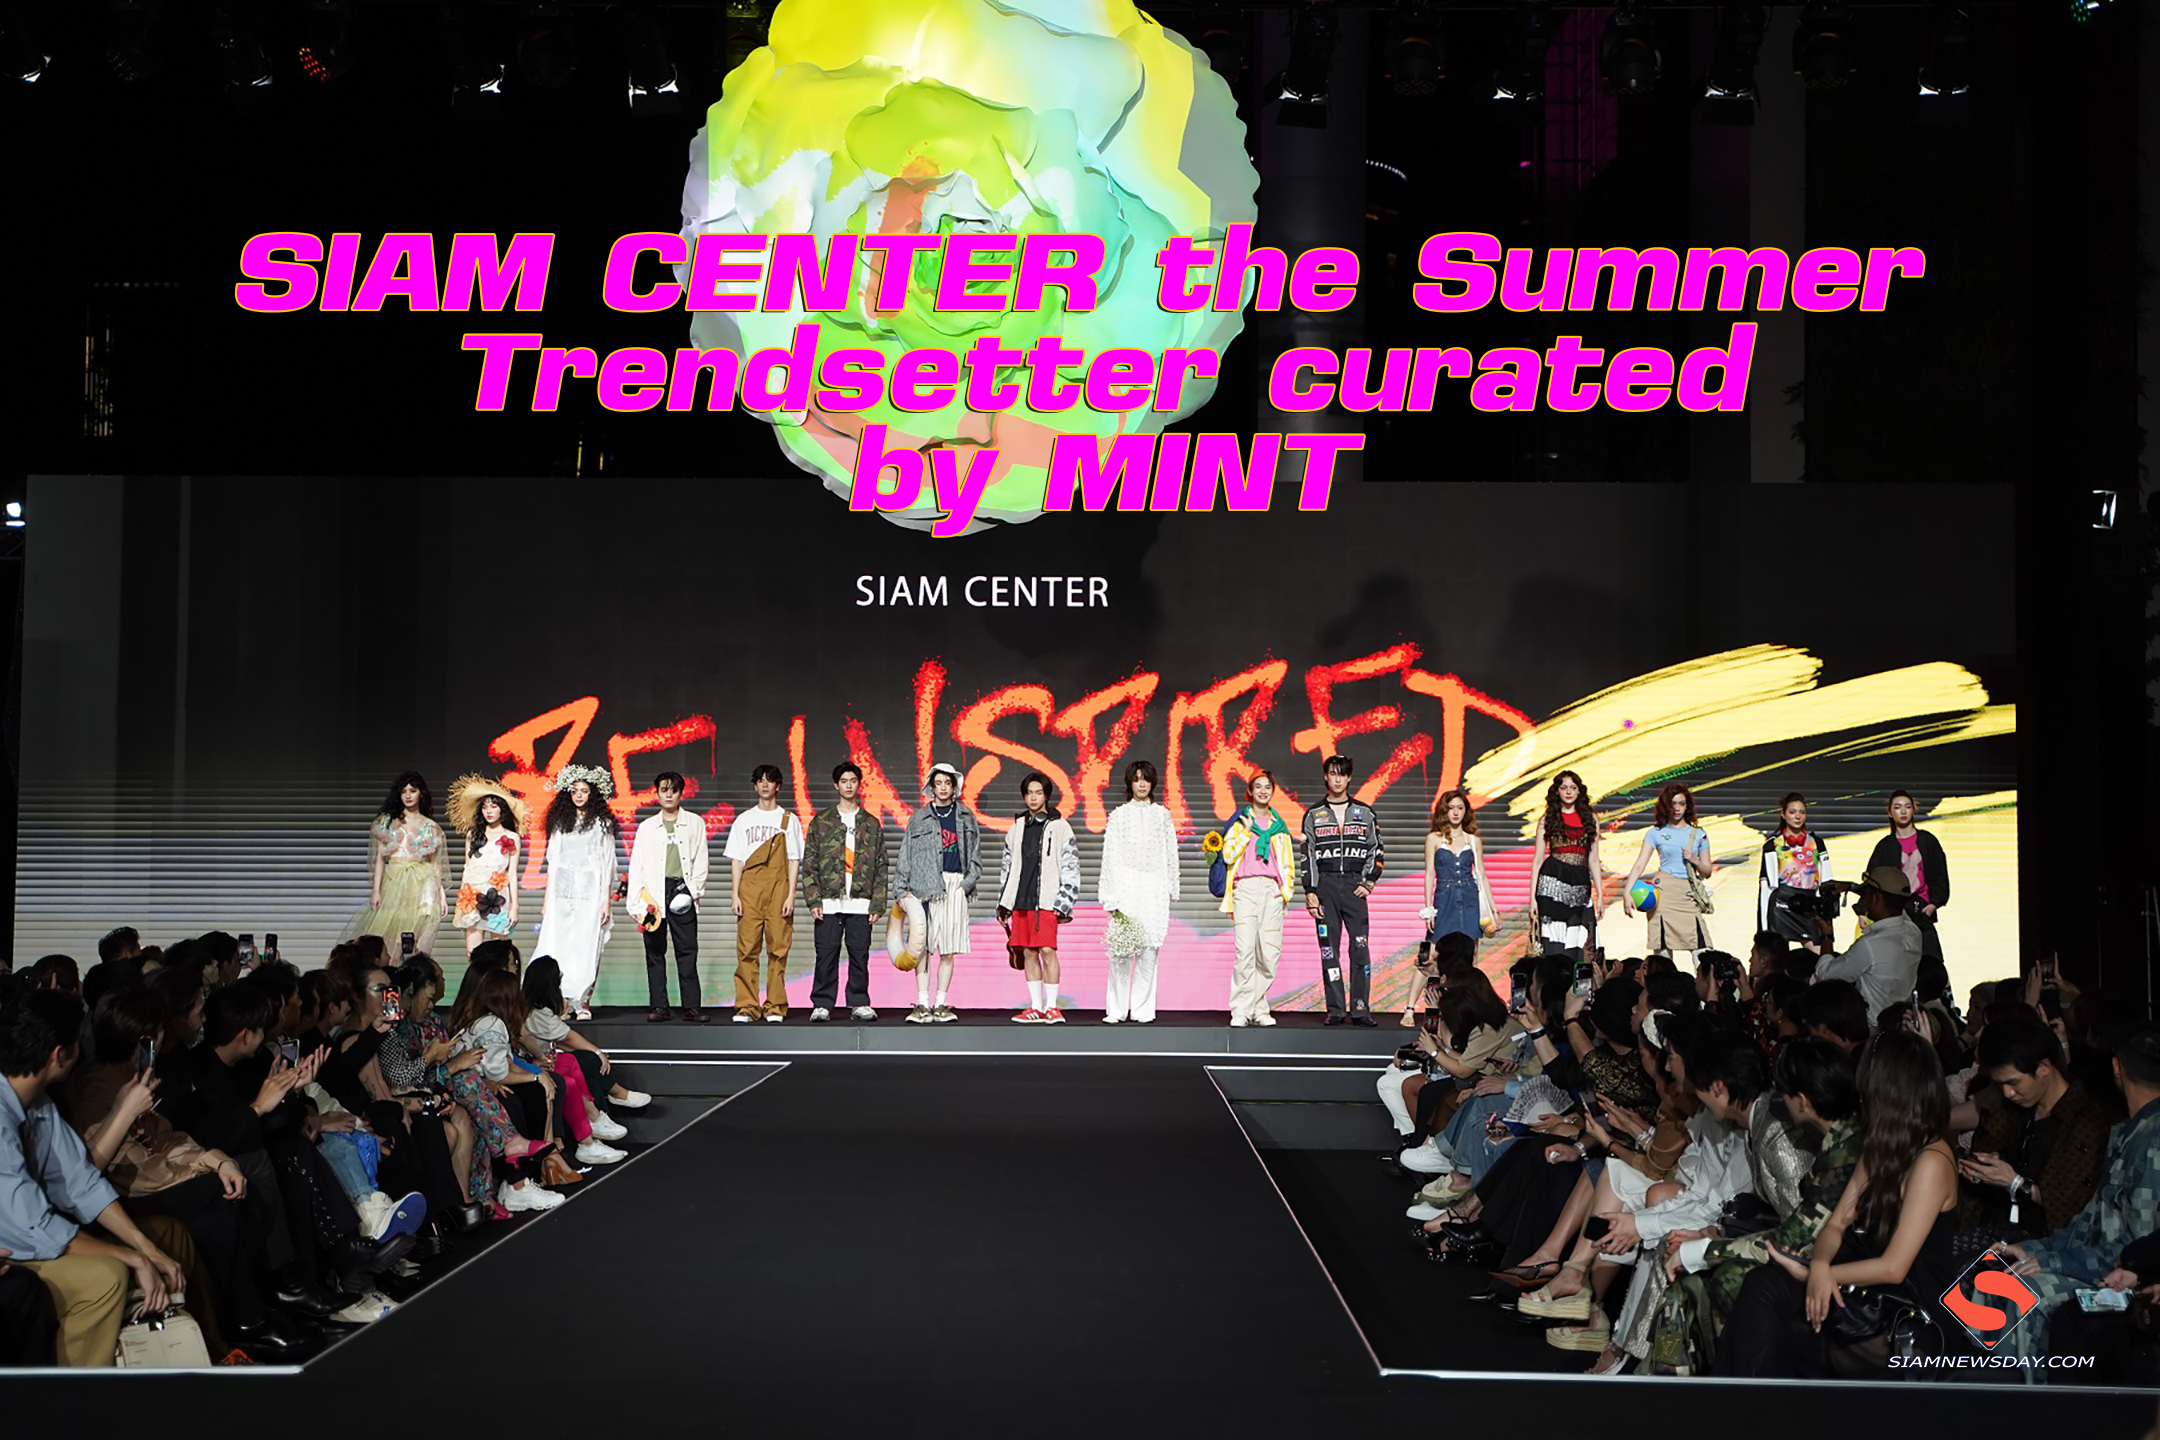 SIAM CENTER the Summer Trendsetter curated by MINT